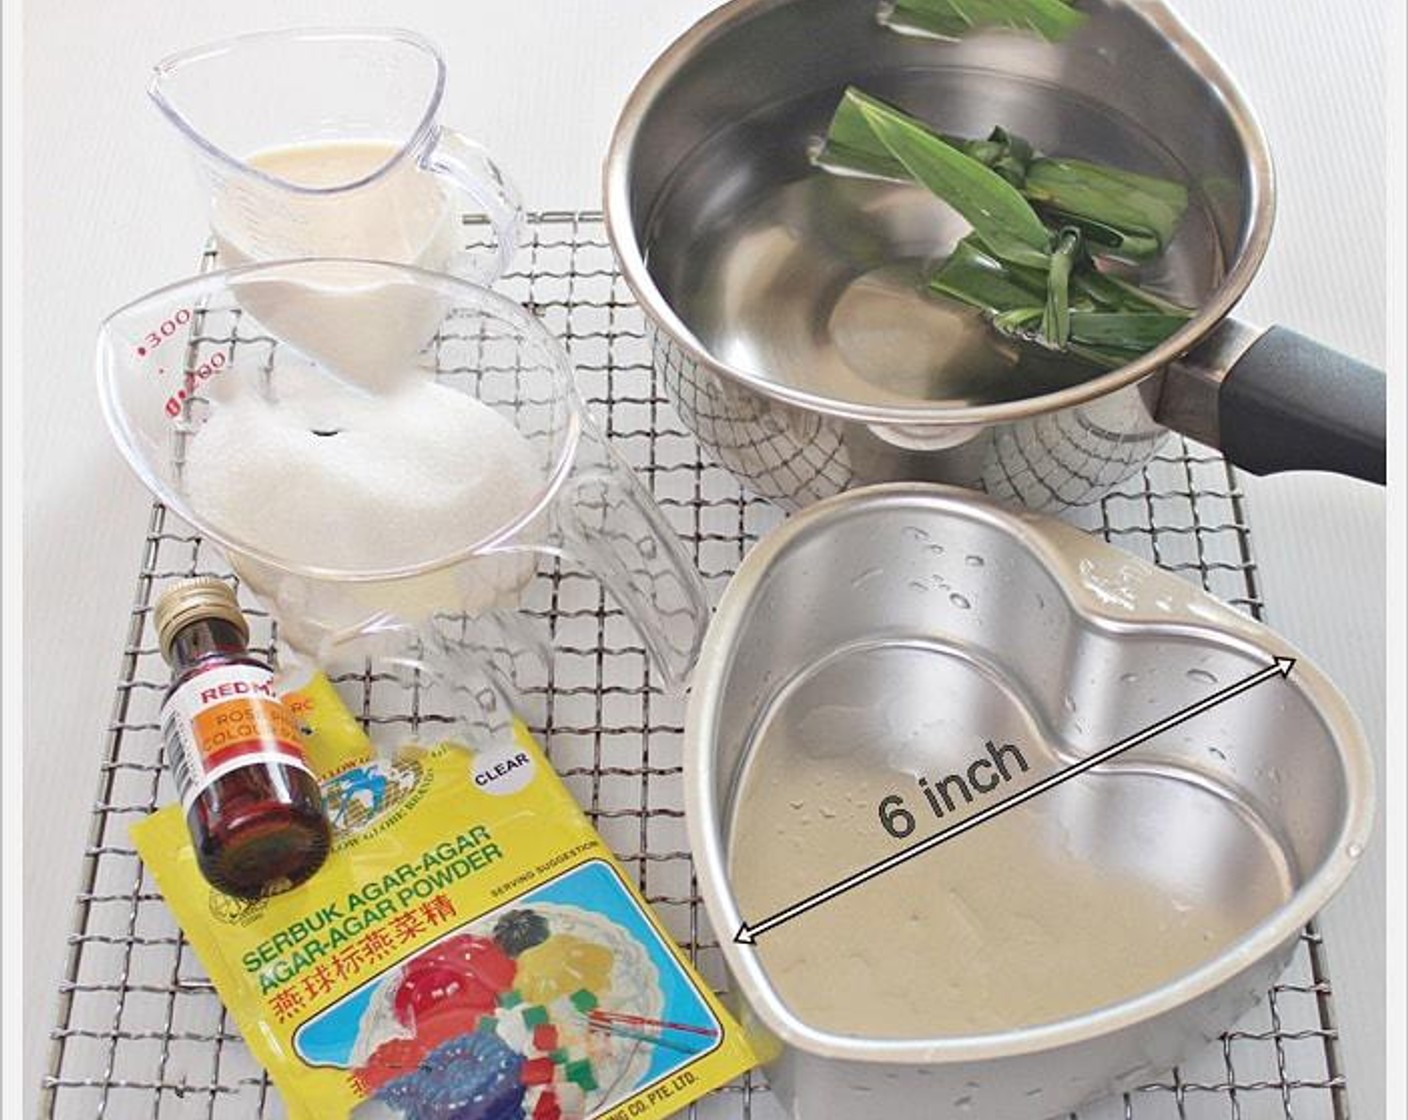 step 1 In a pot, add Water (3 1/3 cups), Granulated Sugar (3/4 cup), Agar-Agar Powder (1 Tbsp), and Pandan Leaves (2) together. Stir mixture until boiling at medium heat. Turn off heat and stir for 1 minute, discard pandan leaves.